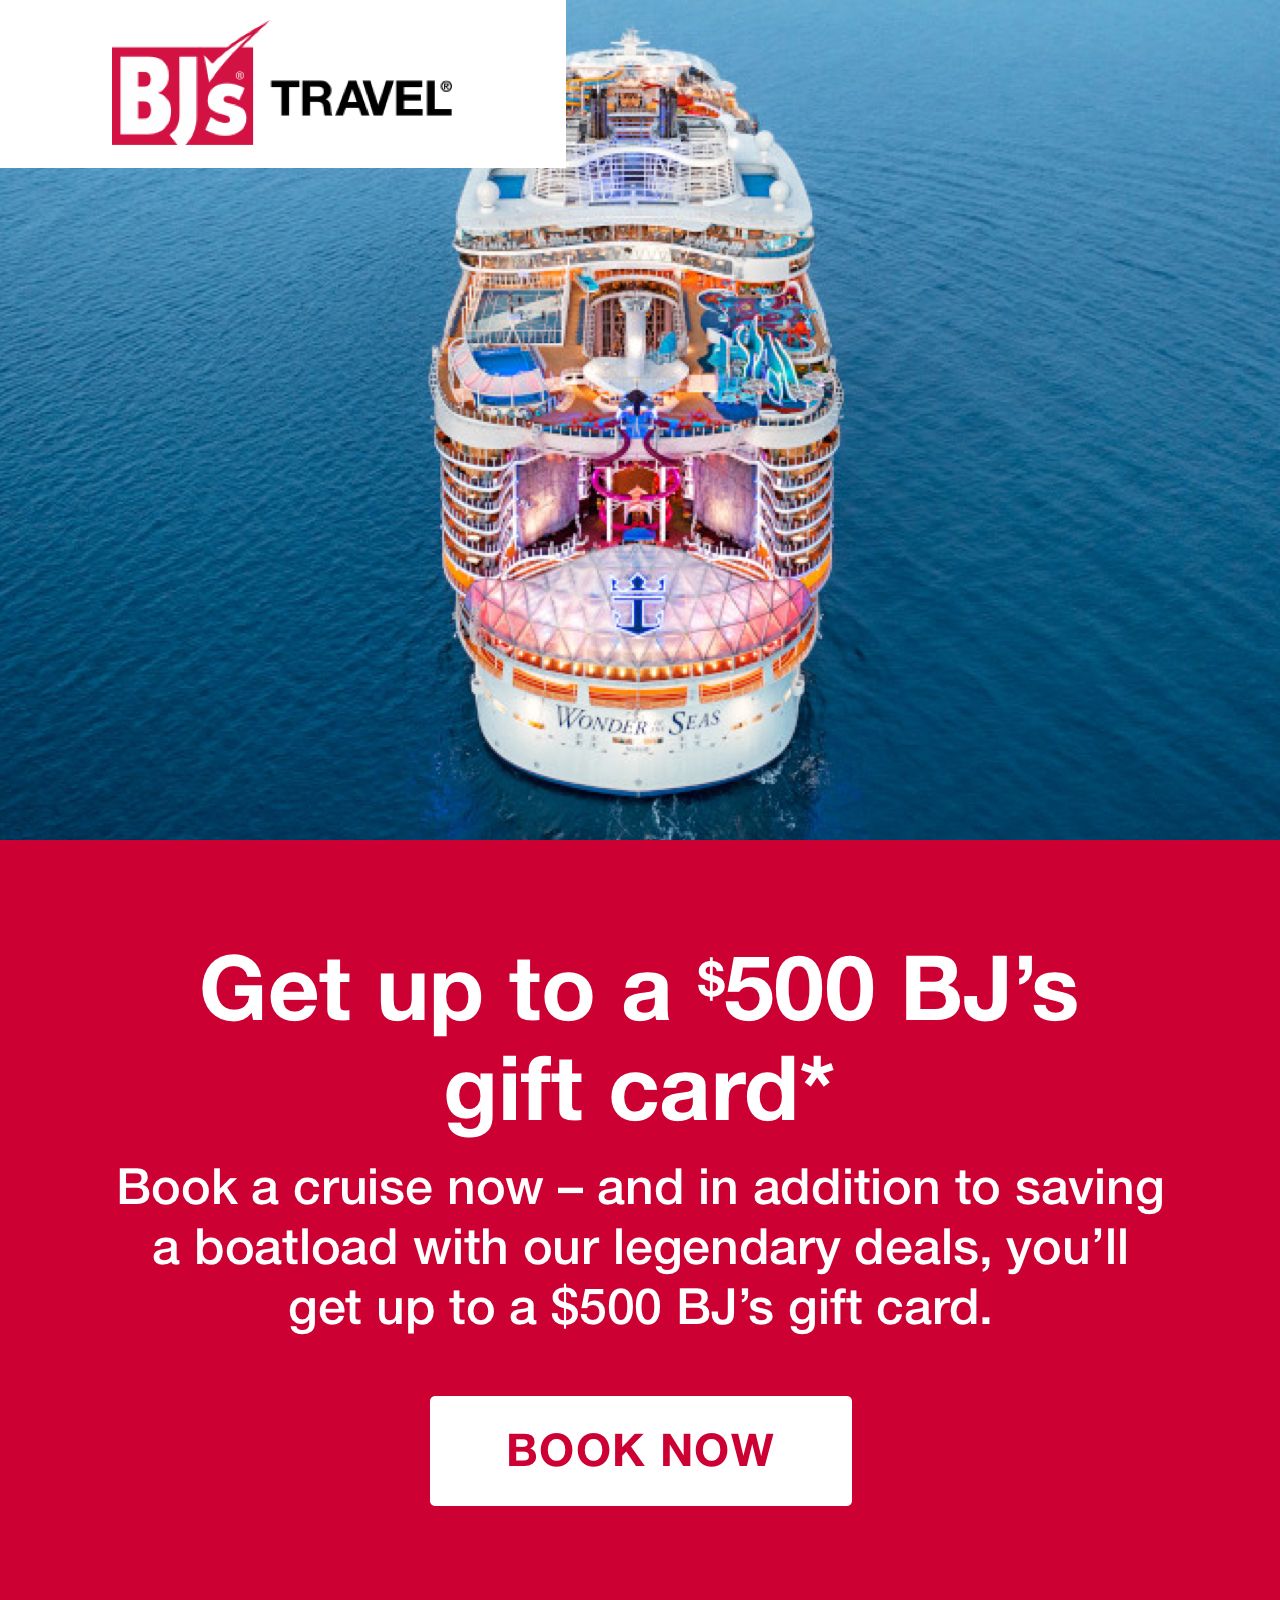 BJ's Travel. Get up to a $500 BJ's gift card*. Book a cruise now - and in addition to saving a boatload with our legendary deals, you'll get up to a $500 BJ's gift card. Click here to book now